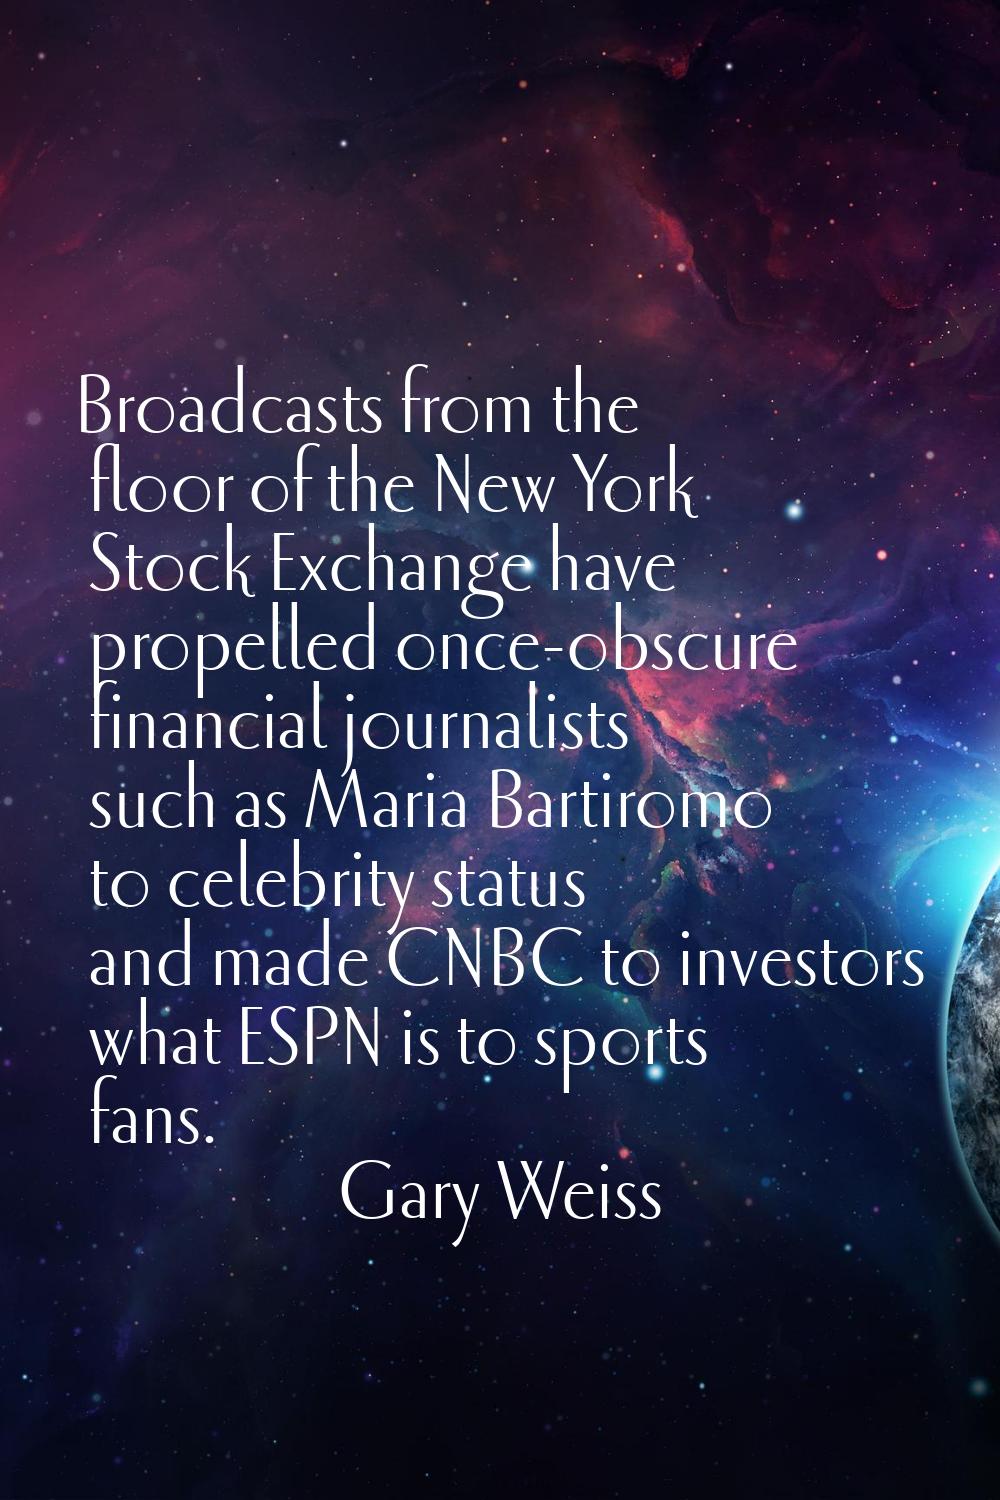 Broadcasts from the floor of the New York Stock Exchange have propelled once-obscure financial jour